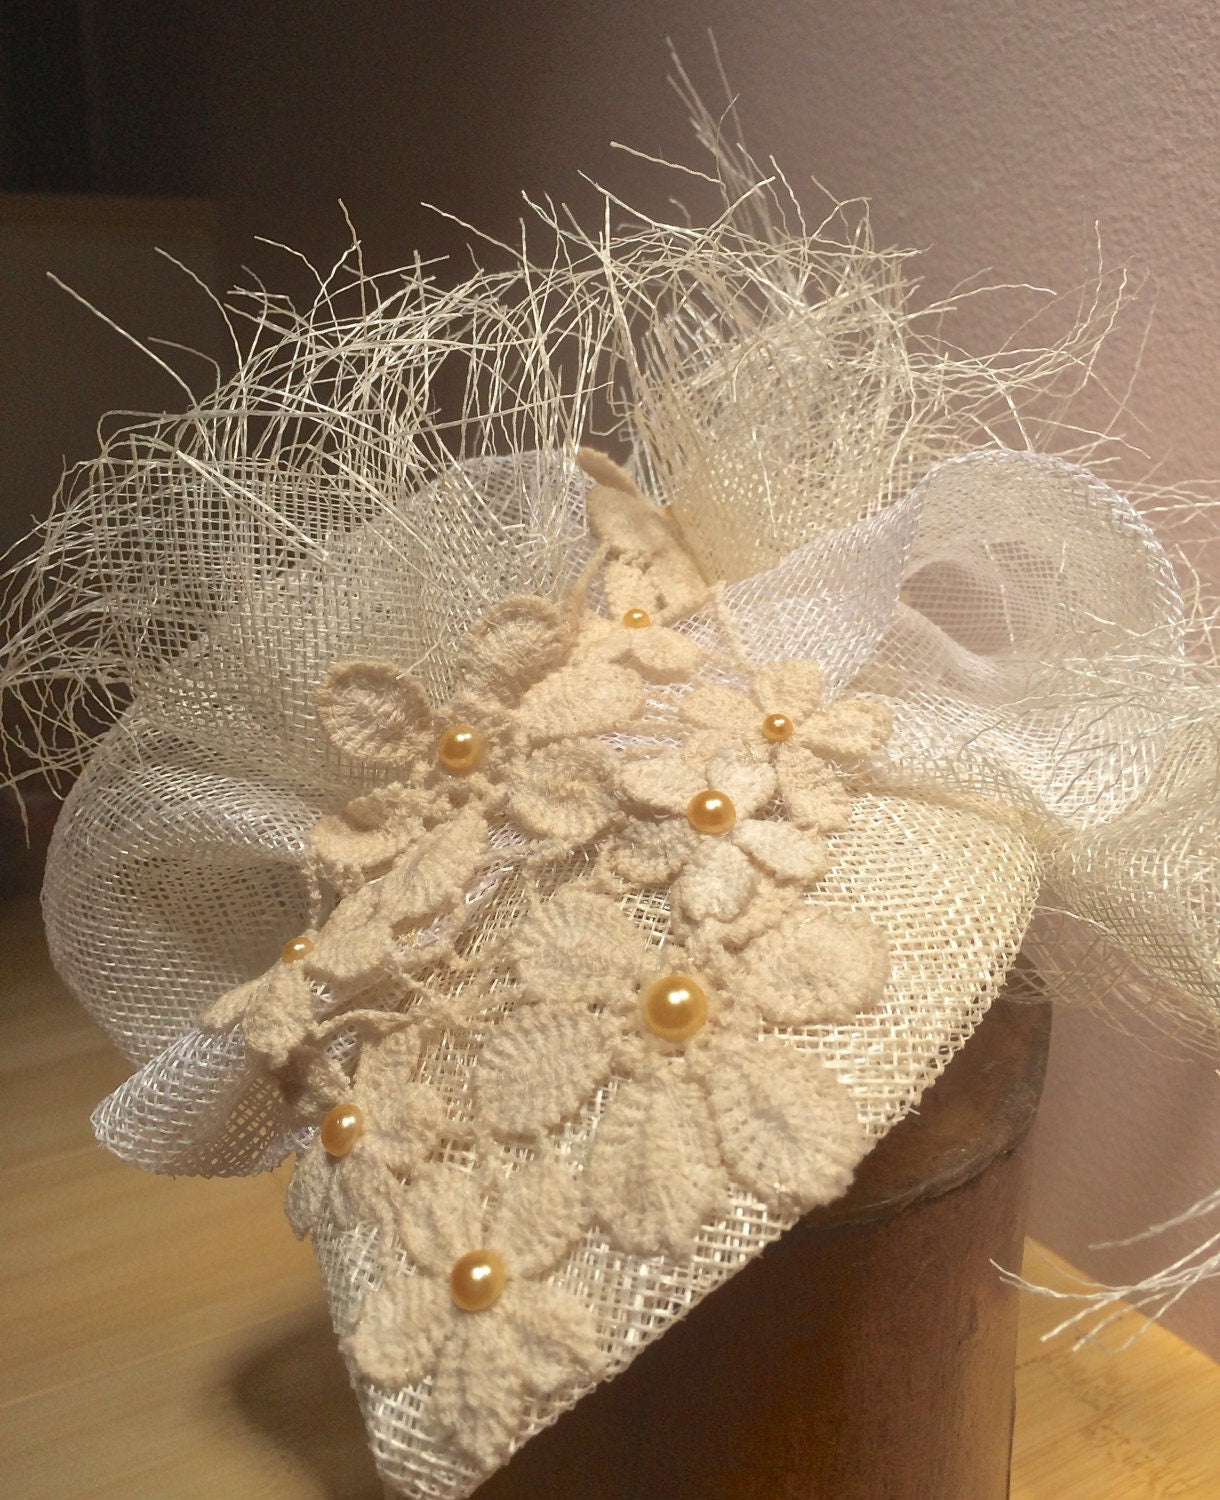 Ivory SINAMAY Wedding Fascinator, Cotton Lace Wedding Hat, Wedding headpiece with Beads-BRIDAL headpiece- Hat for the Bride-Off White Bridal